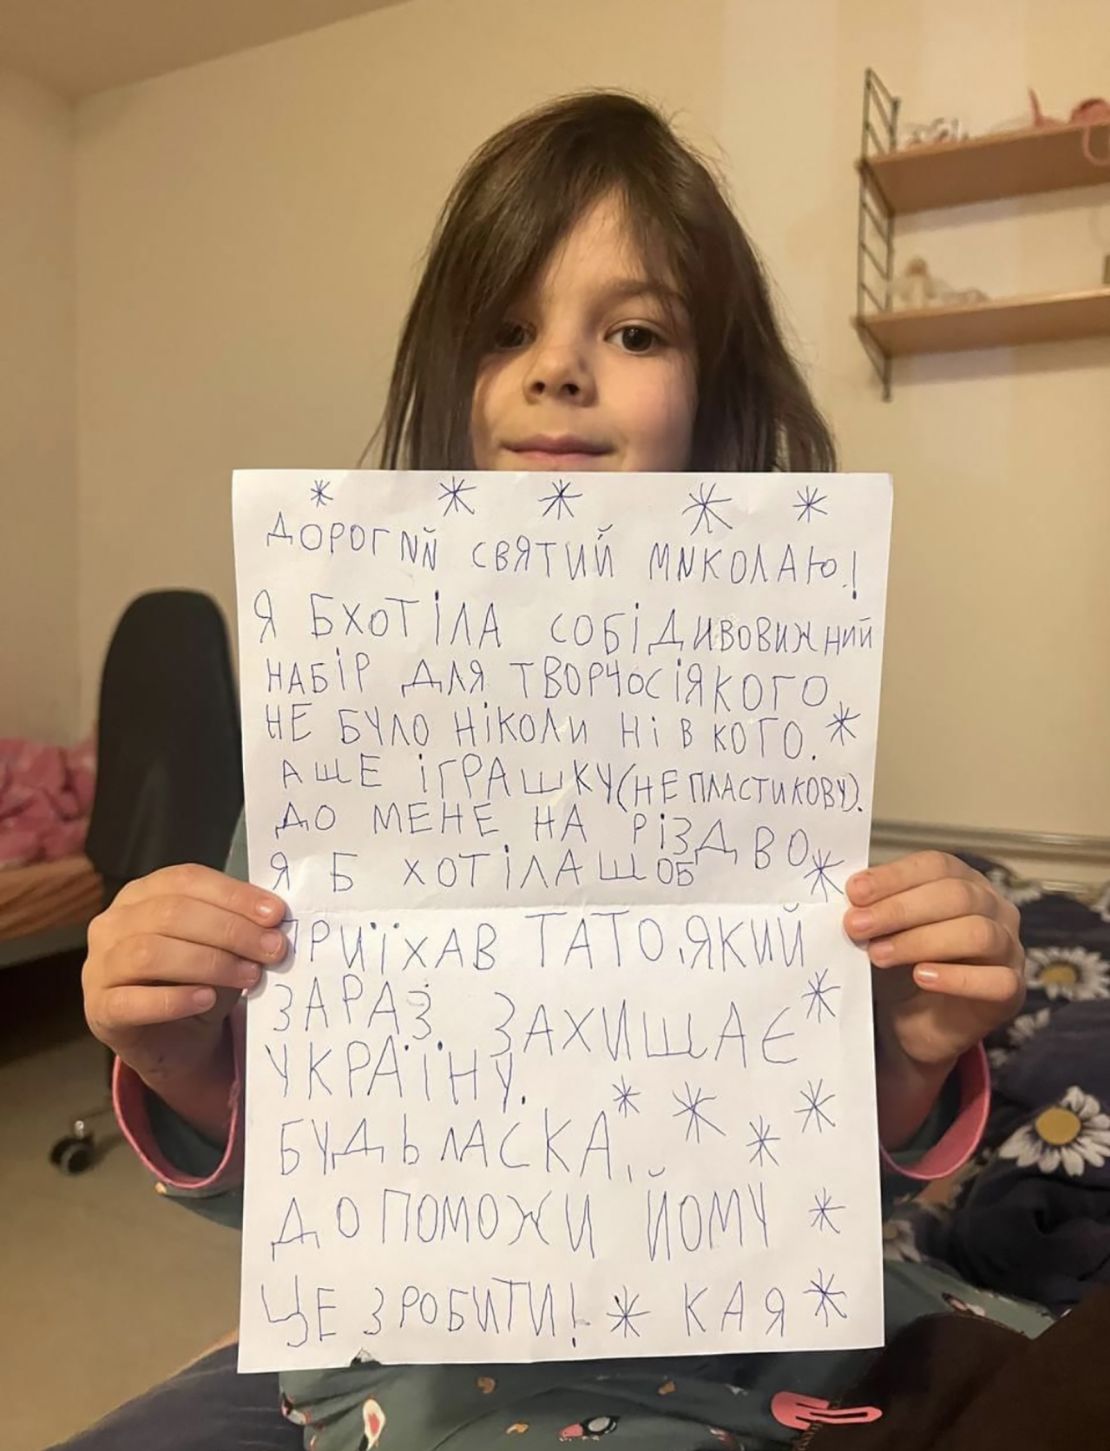 Kaya, 6 years old. Kaya wants a craft kit, a toy and to see her dad for Christmas. Her father is a member of the 47th Mechanized Brigade fighting in the hot spot of Avdiivka in eastern Ukraine. In her letter to St Nicholas she wrote: "I would like my dad, who is now defending Ukraine, to come to me for Christmas. Please help him to do it." Kaya's father Dmytro wants to see his family for the holidays but they have relocated to Germany.